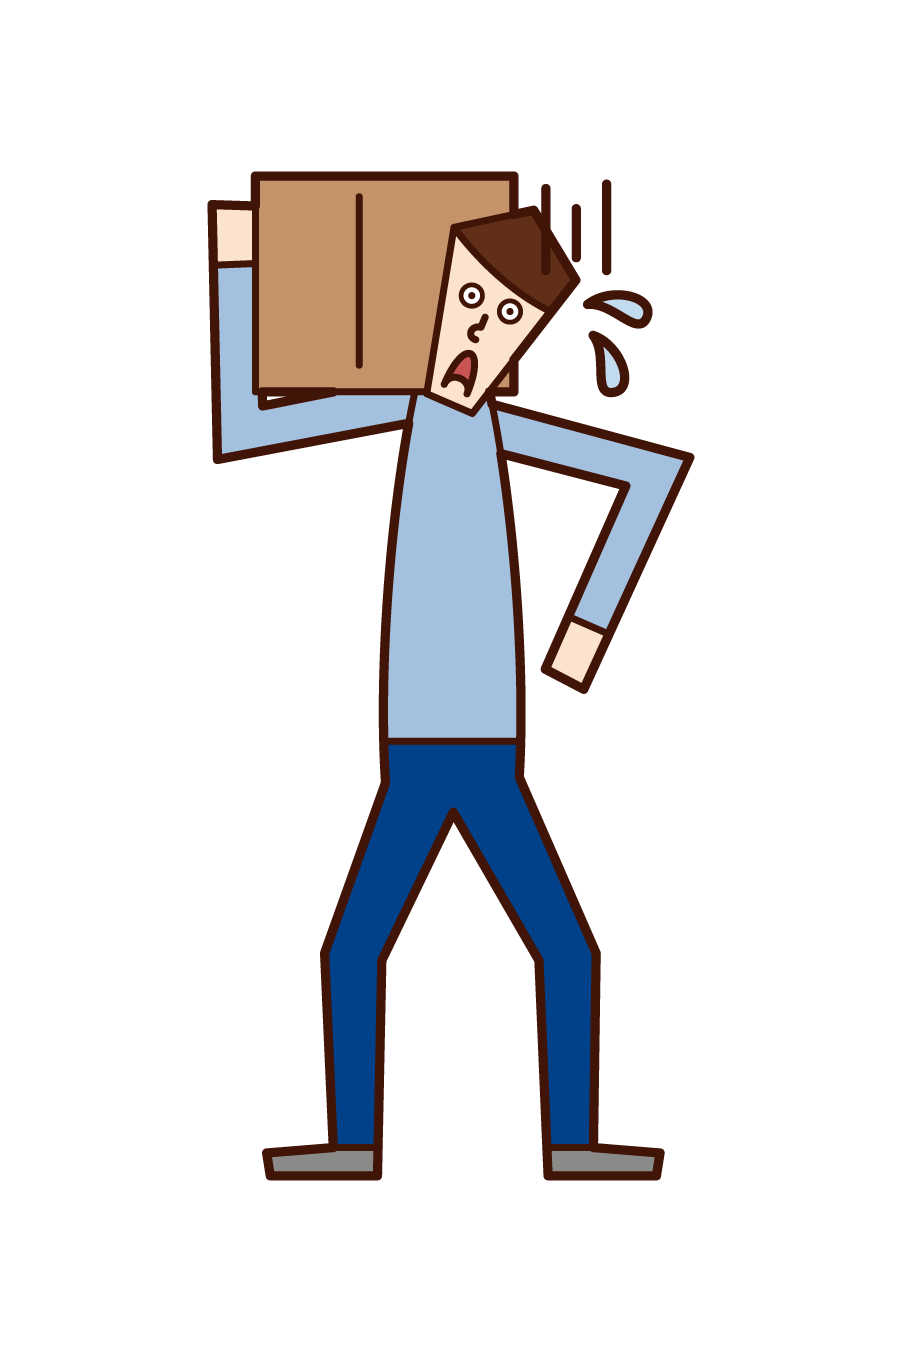 Illustration of a man carrying heavy baggage